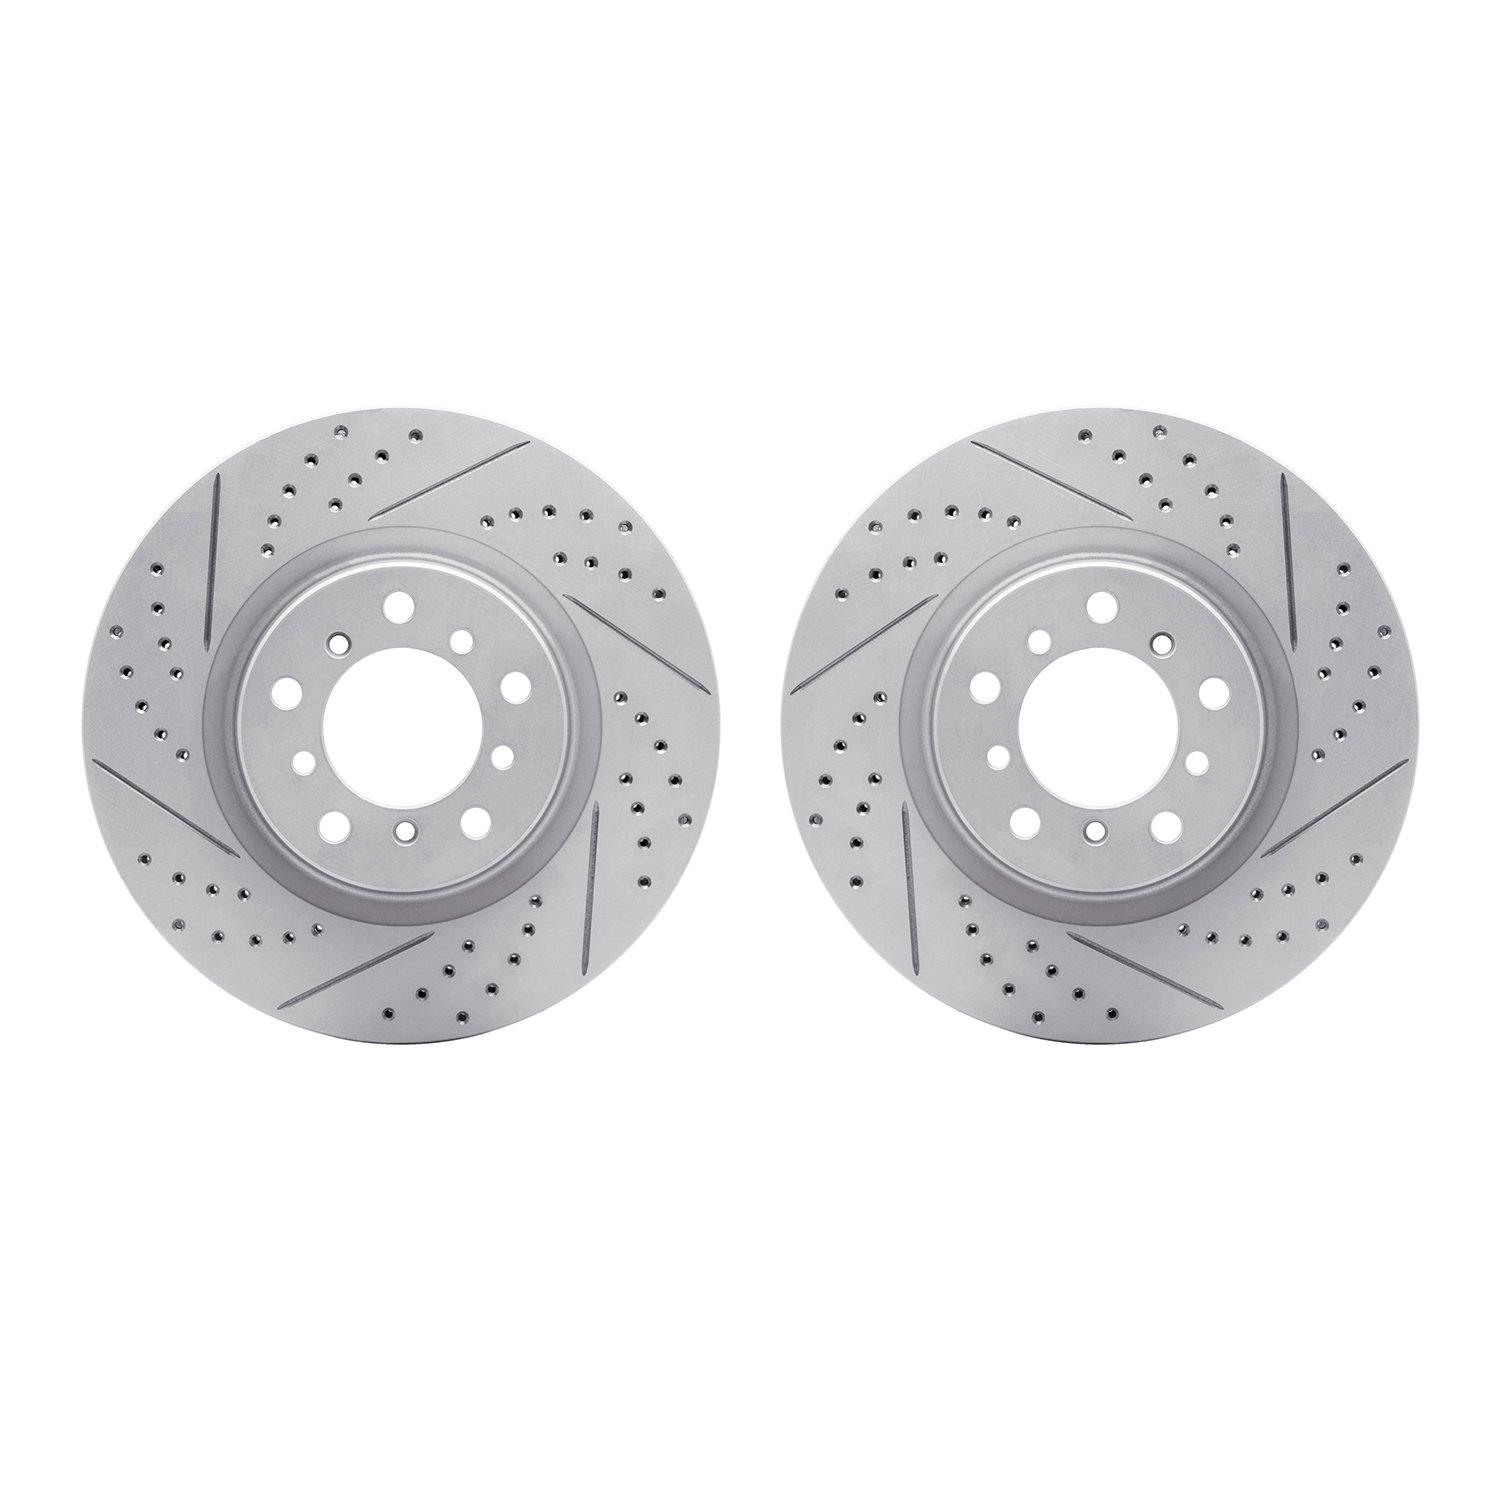 2002-31038 Geoperformance Drilled/Slotted Brake Rotors, 2001-2006 BMW, Position: Front